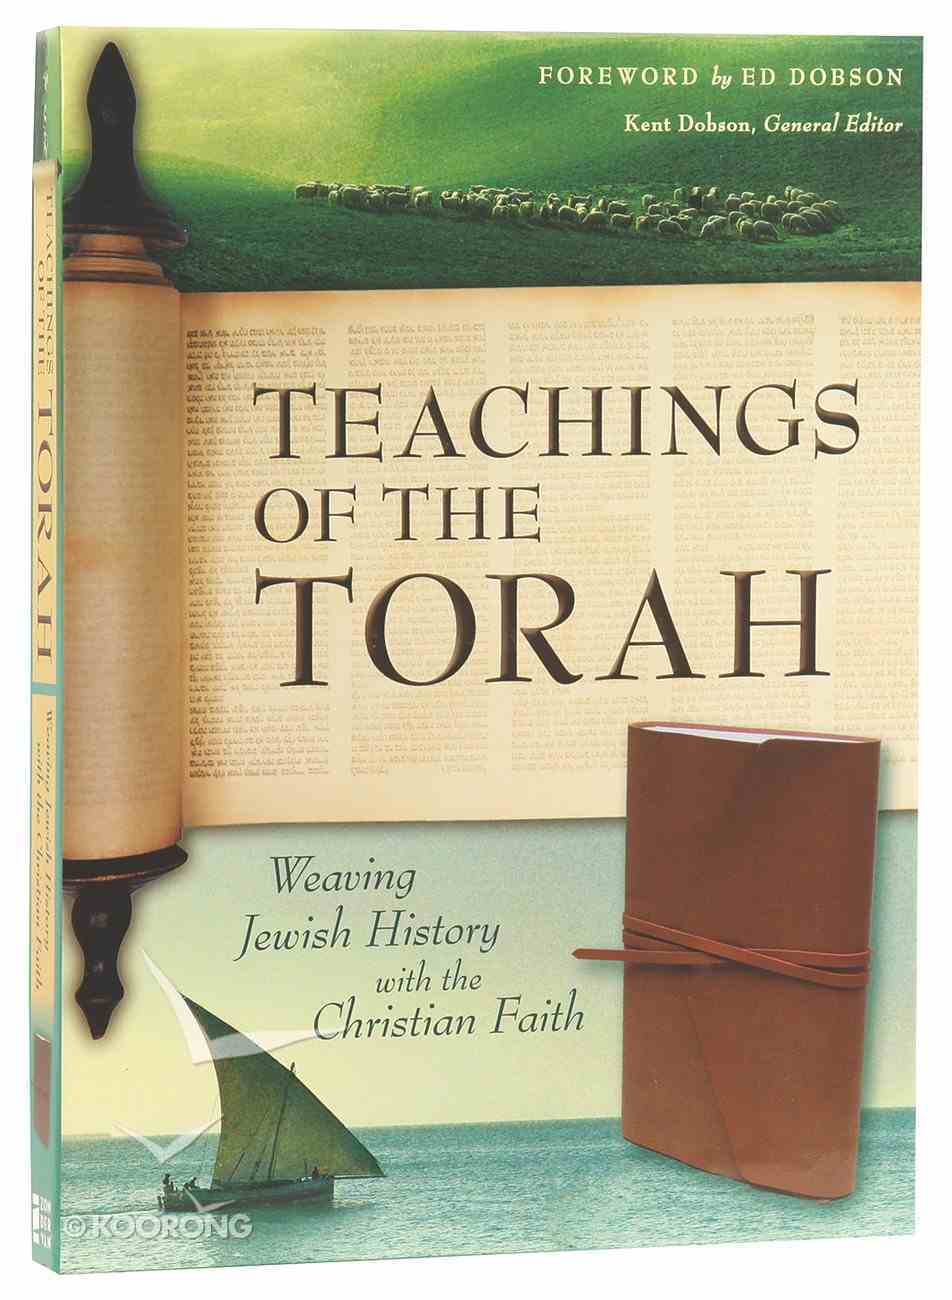 NIV Teachings of the Torah Weaving Jewish History With the Christian Faith (Black Letter Edition) Imitation Leather